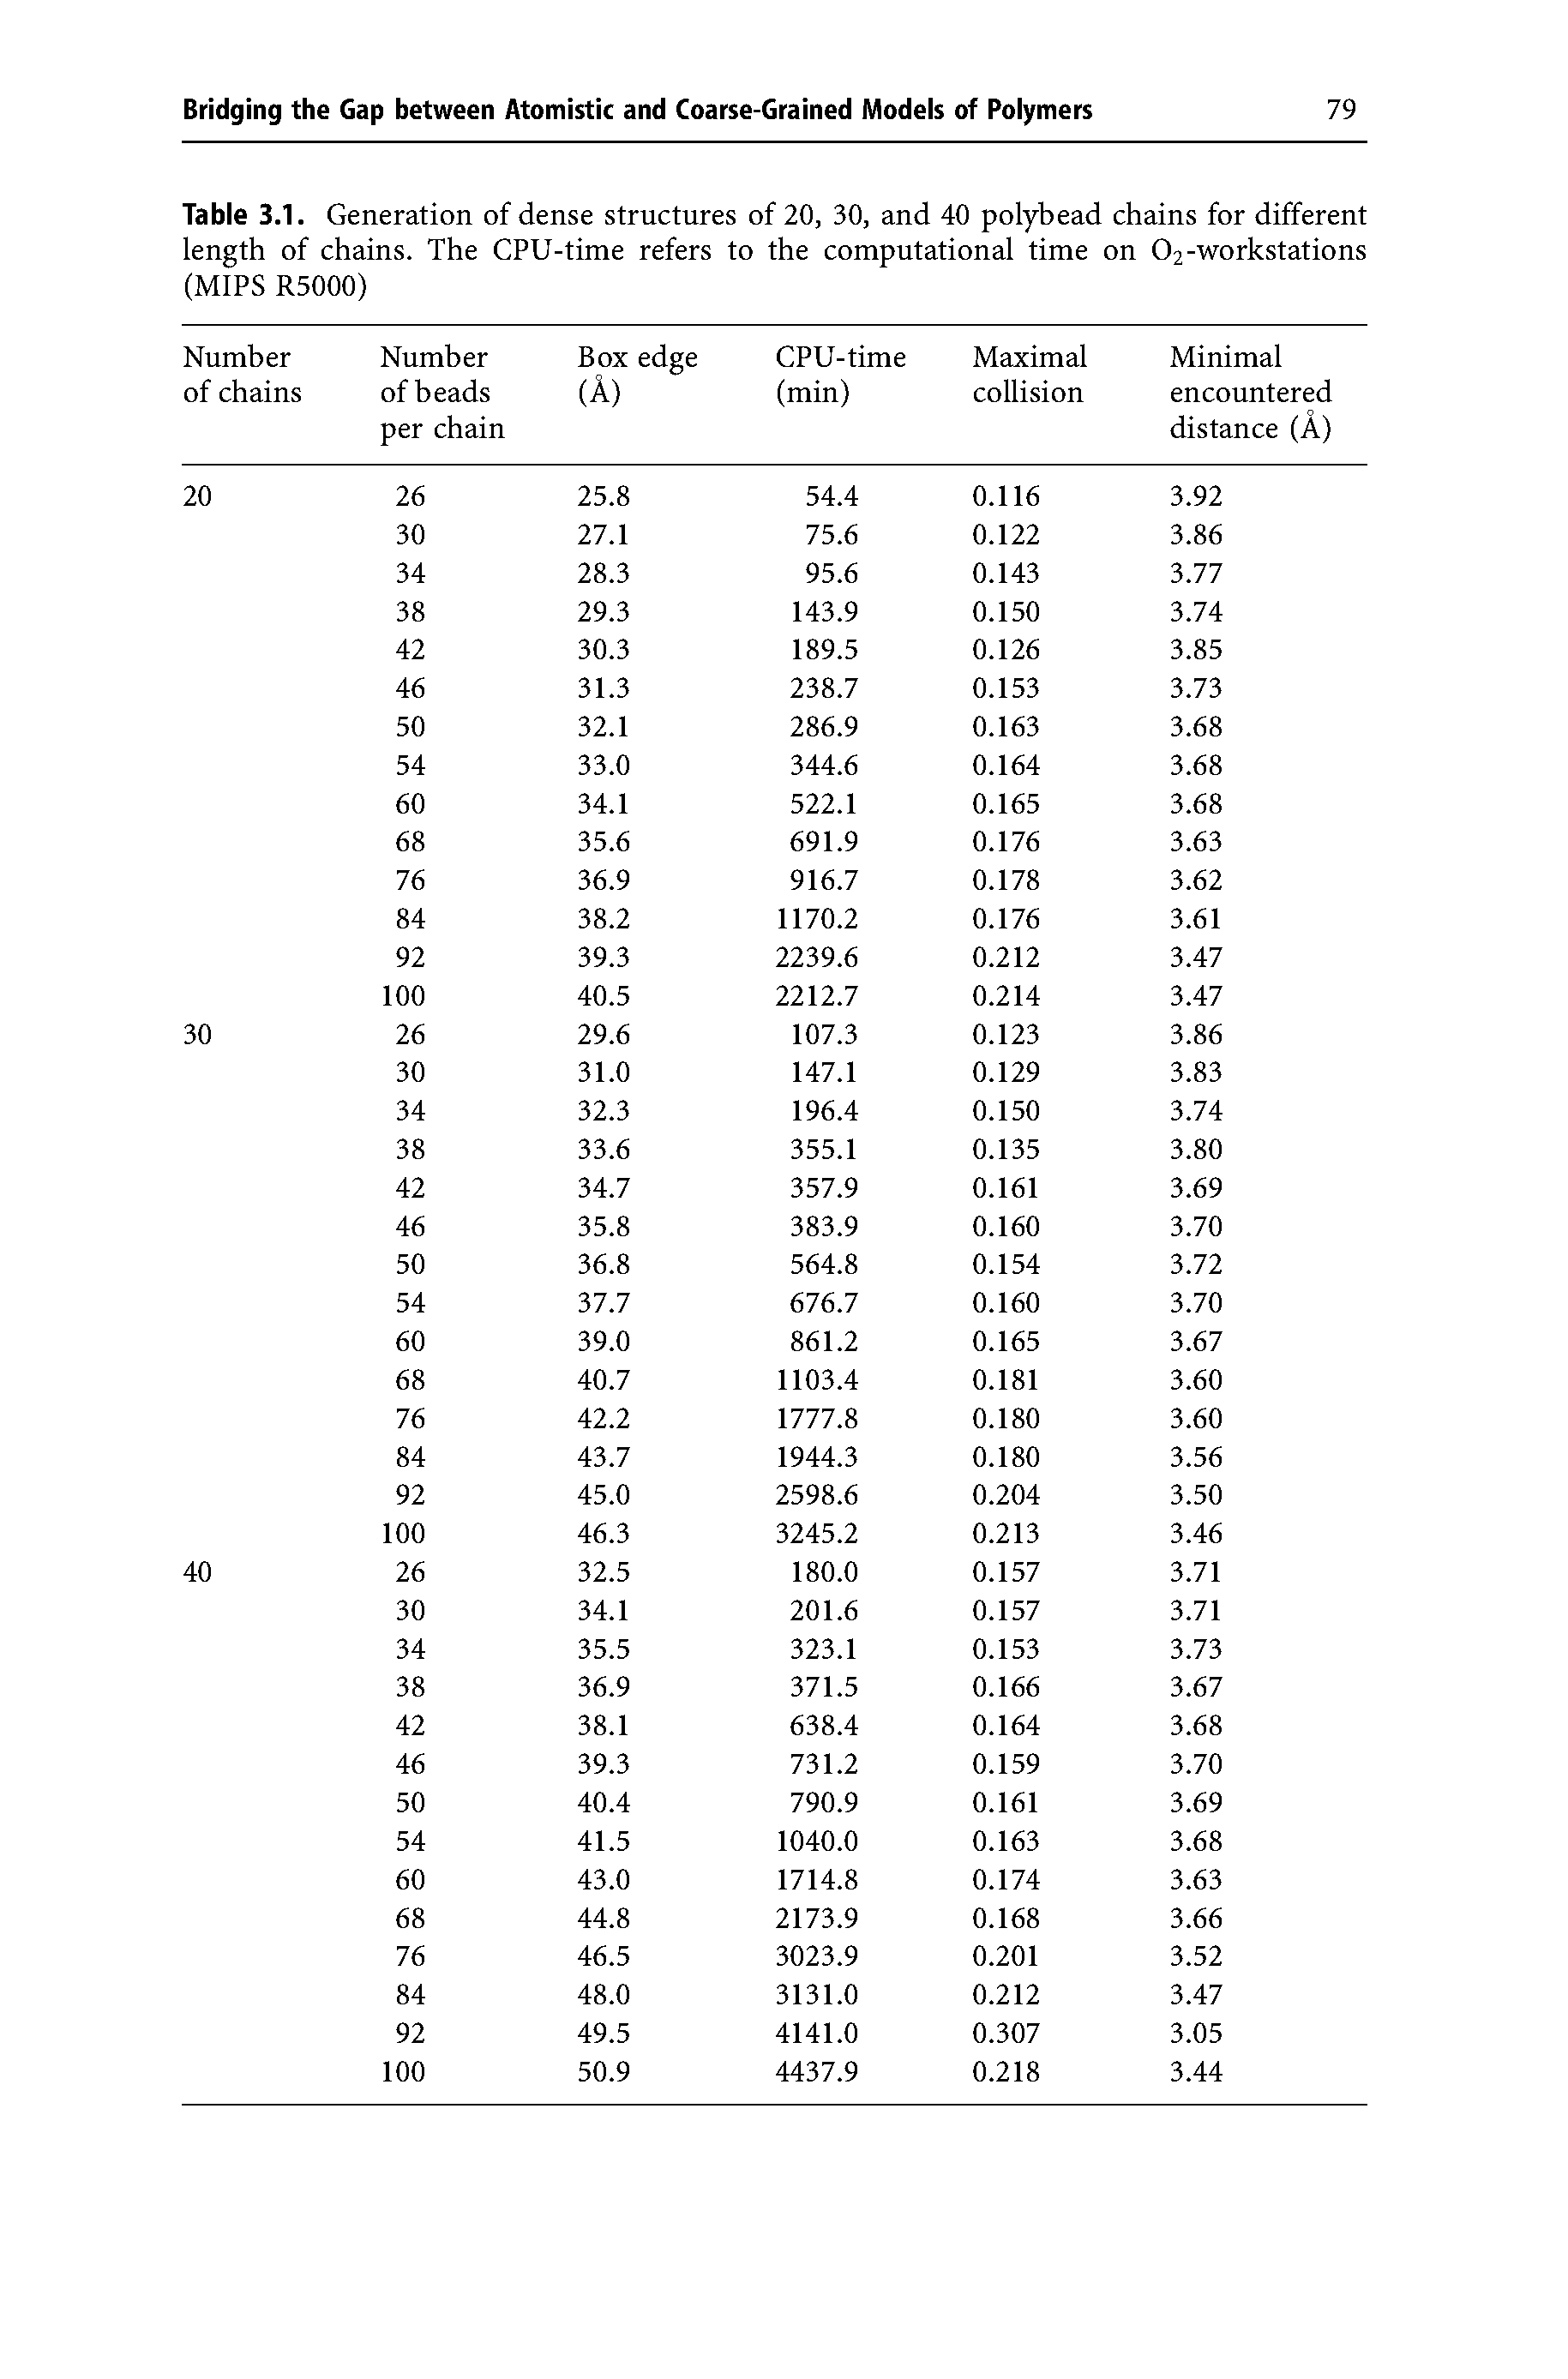 Table 3.1. Generation of dense structures of 20, 30, and 40 polybead chains for different length of chains. The CPU-time refers to the computational time on 02-workstations (MIPS R5000)...